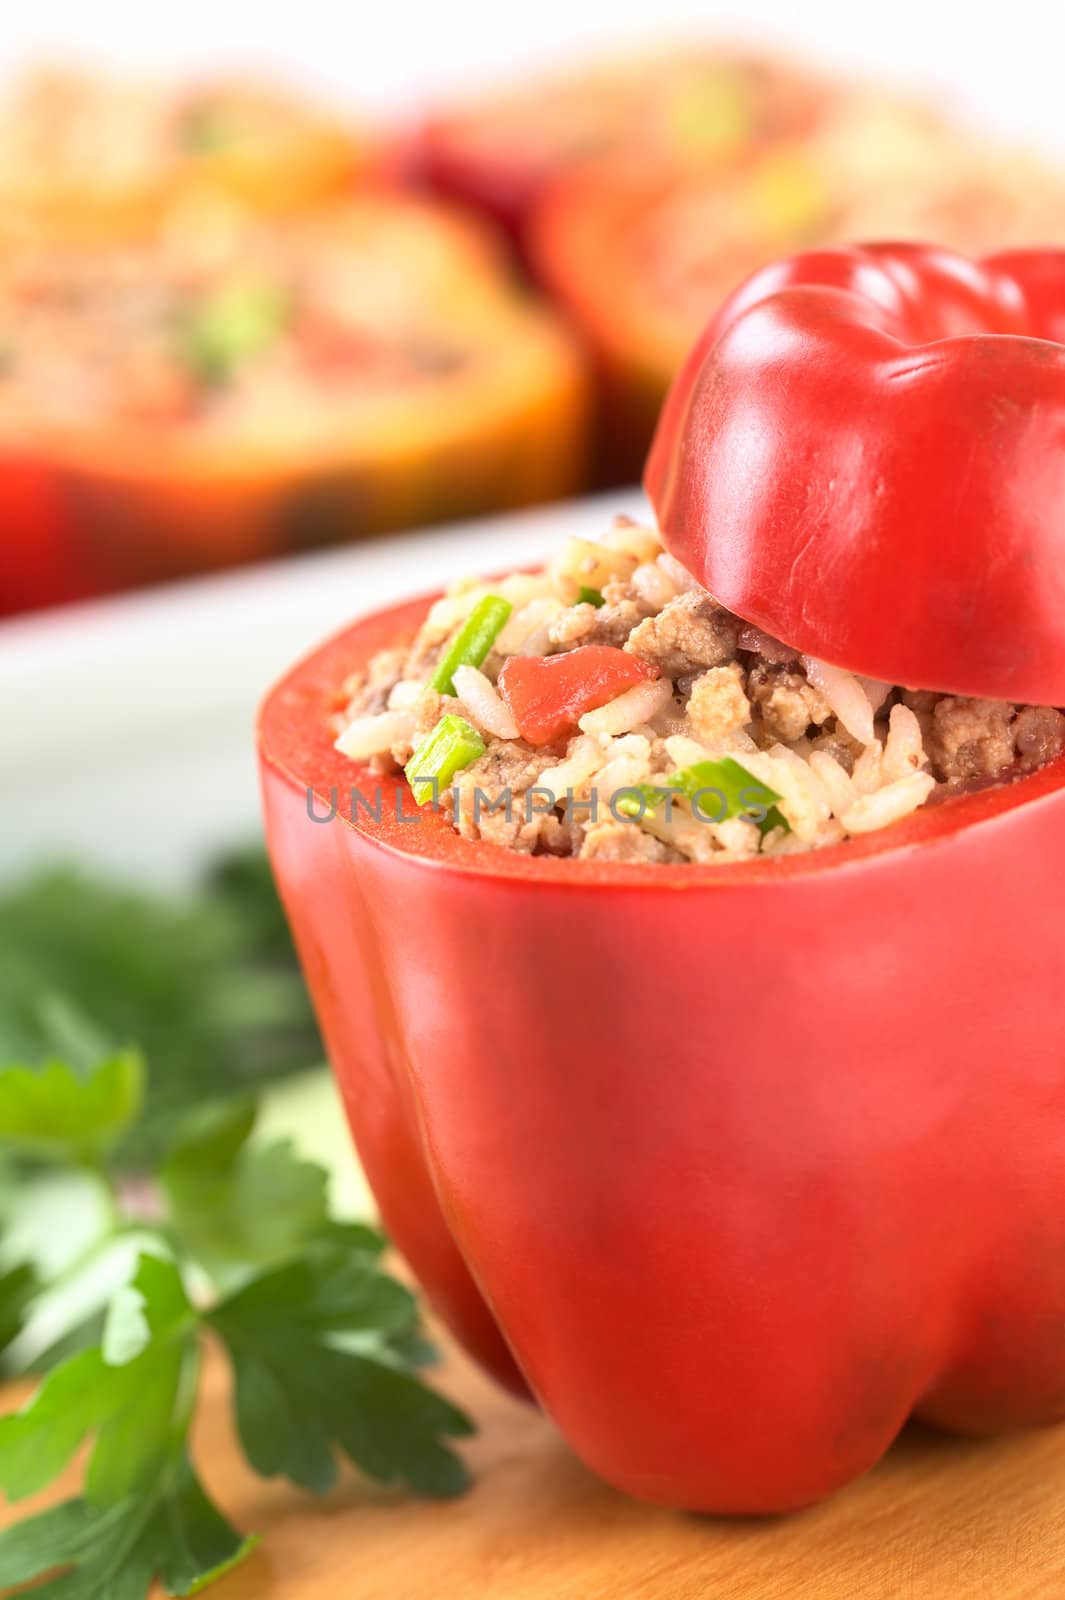 Unbaked stuffed red bell pepper filled with minced meat, onion, rice, tomato and green onion with parsley on the side and a casserole in the back (Selective Focus, Focus on the tomato piece and the stuffing around it in the pepper) 